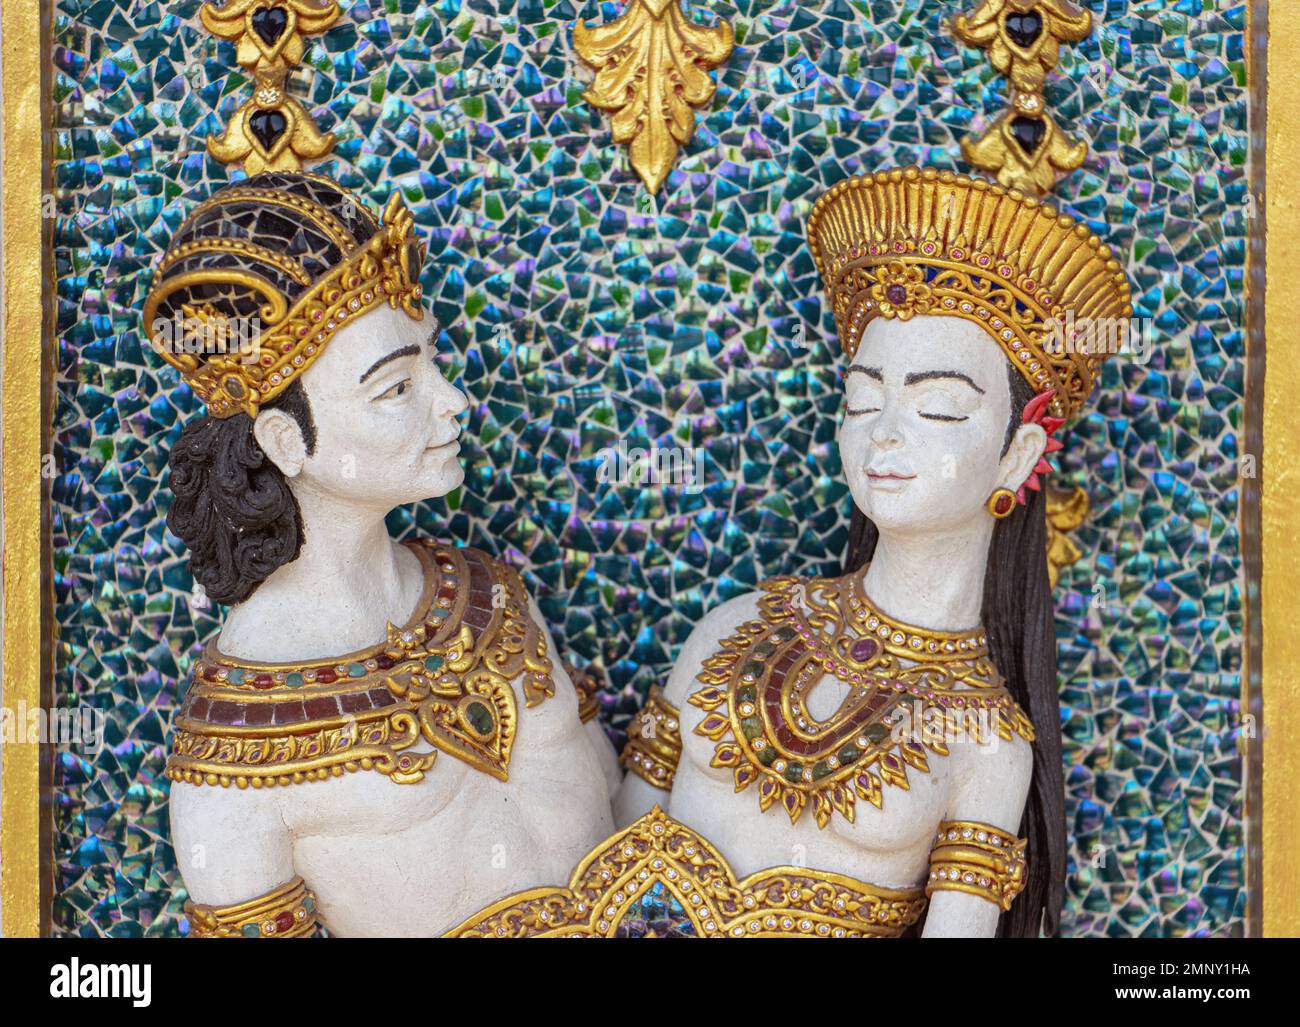 Figurative decoration on the wall of a Buddhist temple Wat Pariwat, Bangkok, Thailand Stock Photo